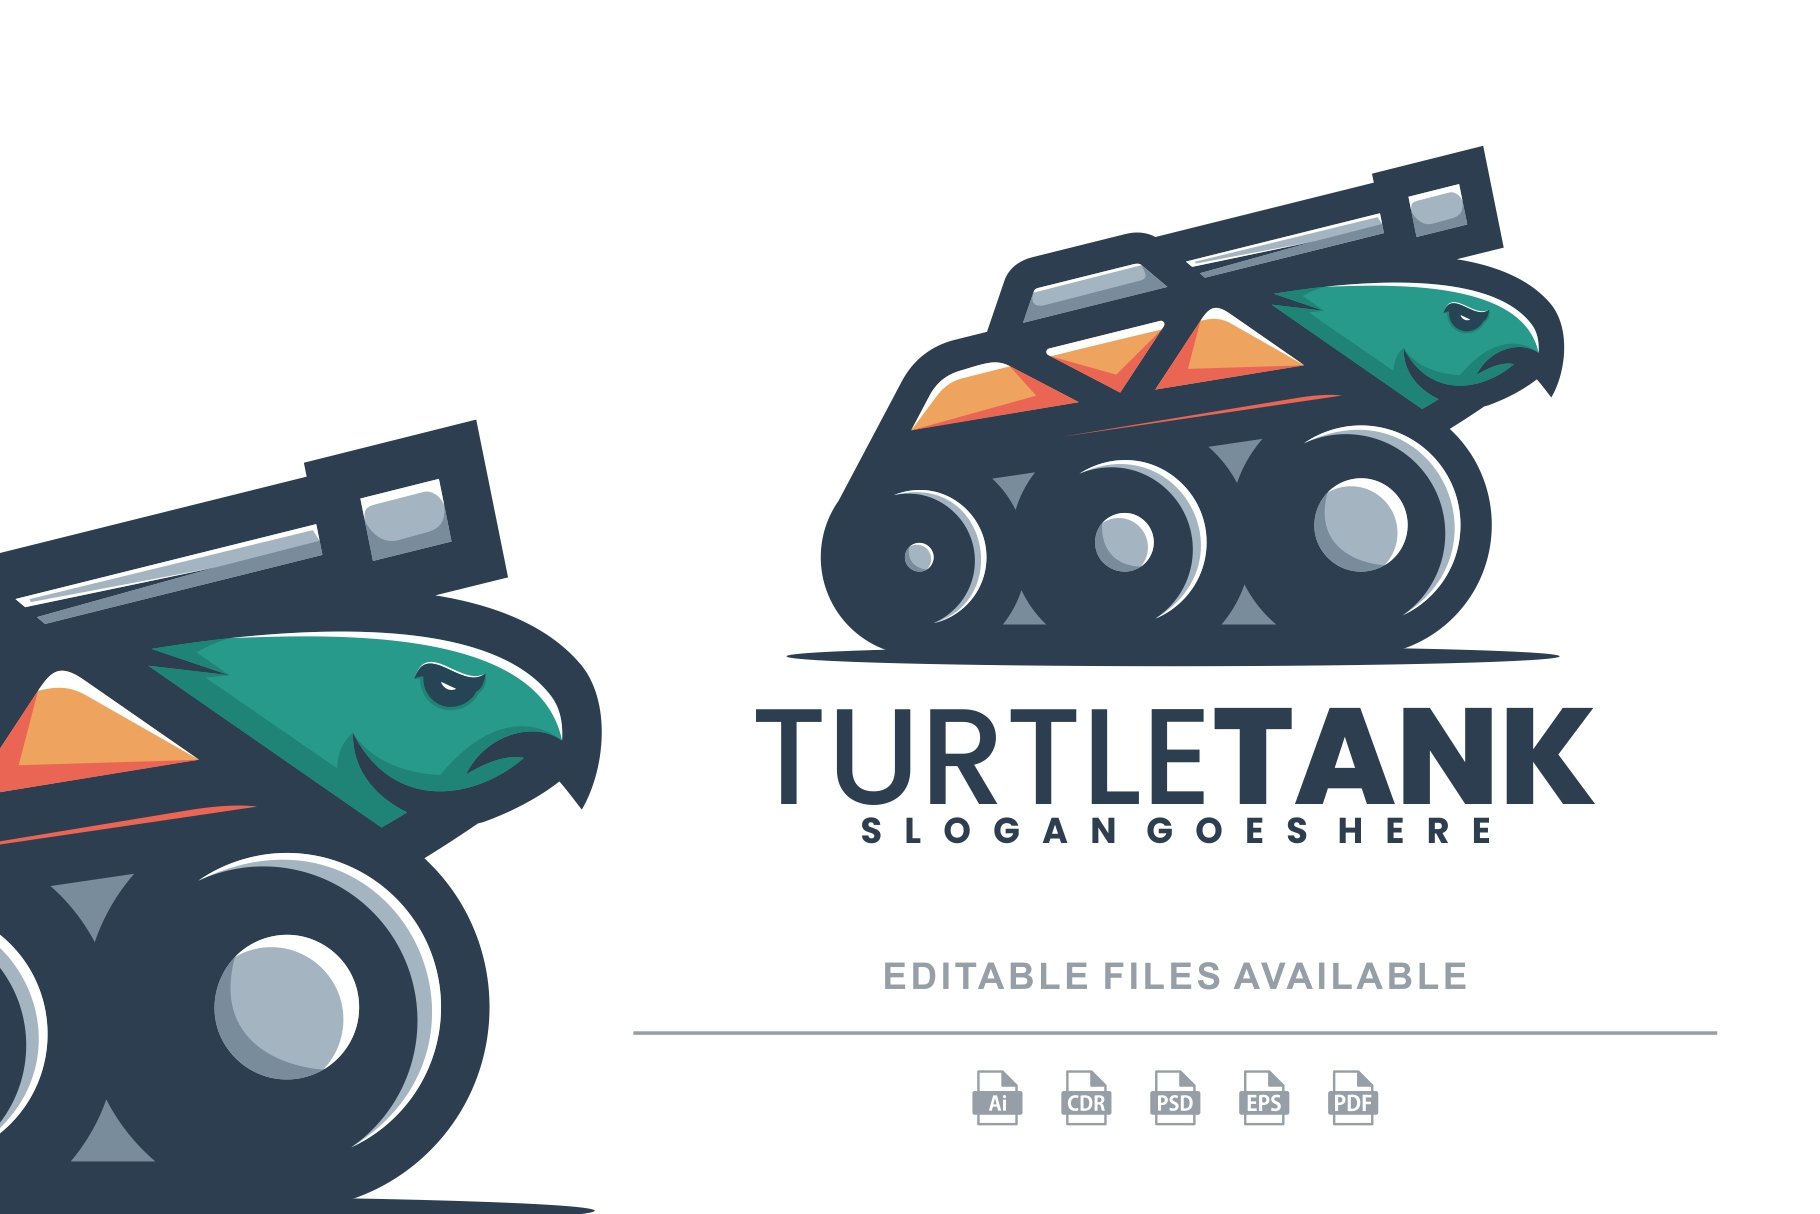 Turtle Tank Simple Logo cover image.